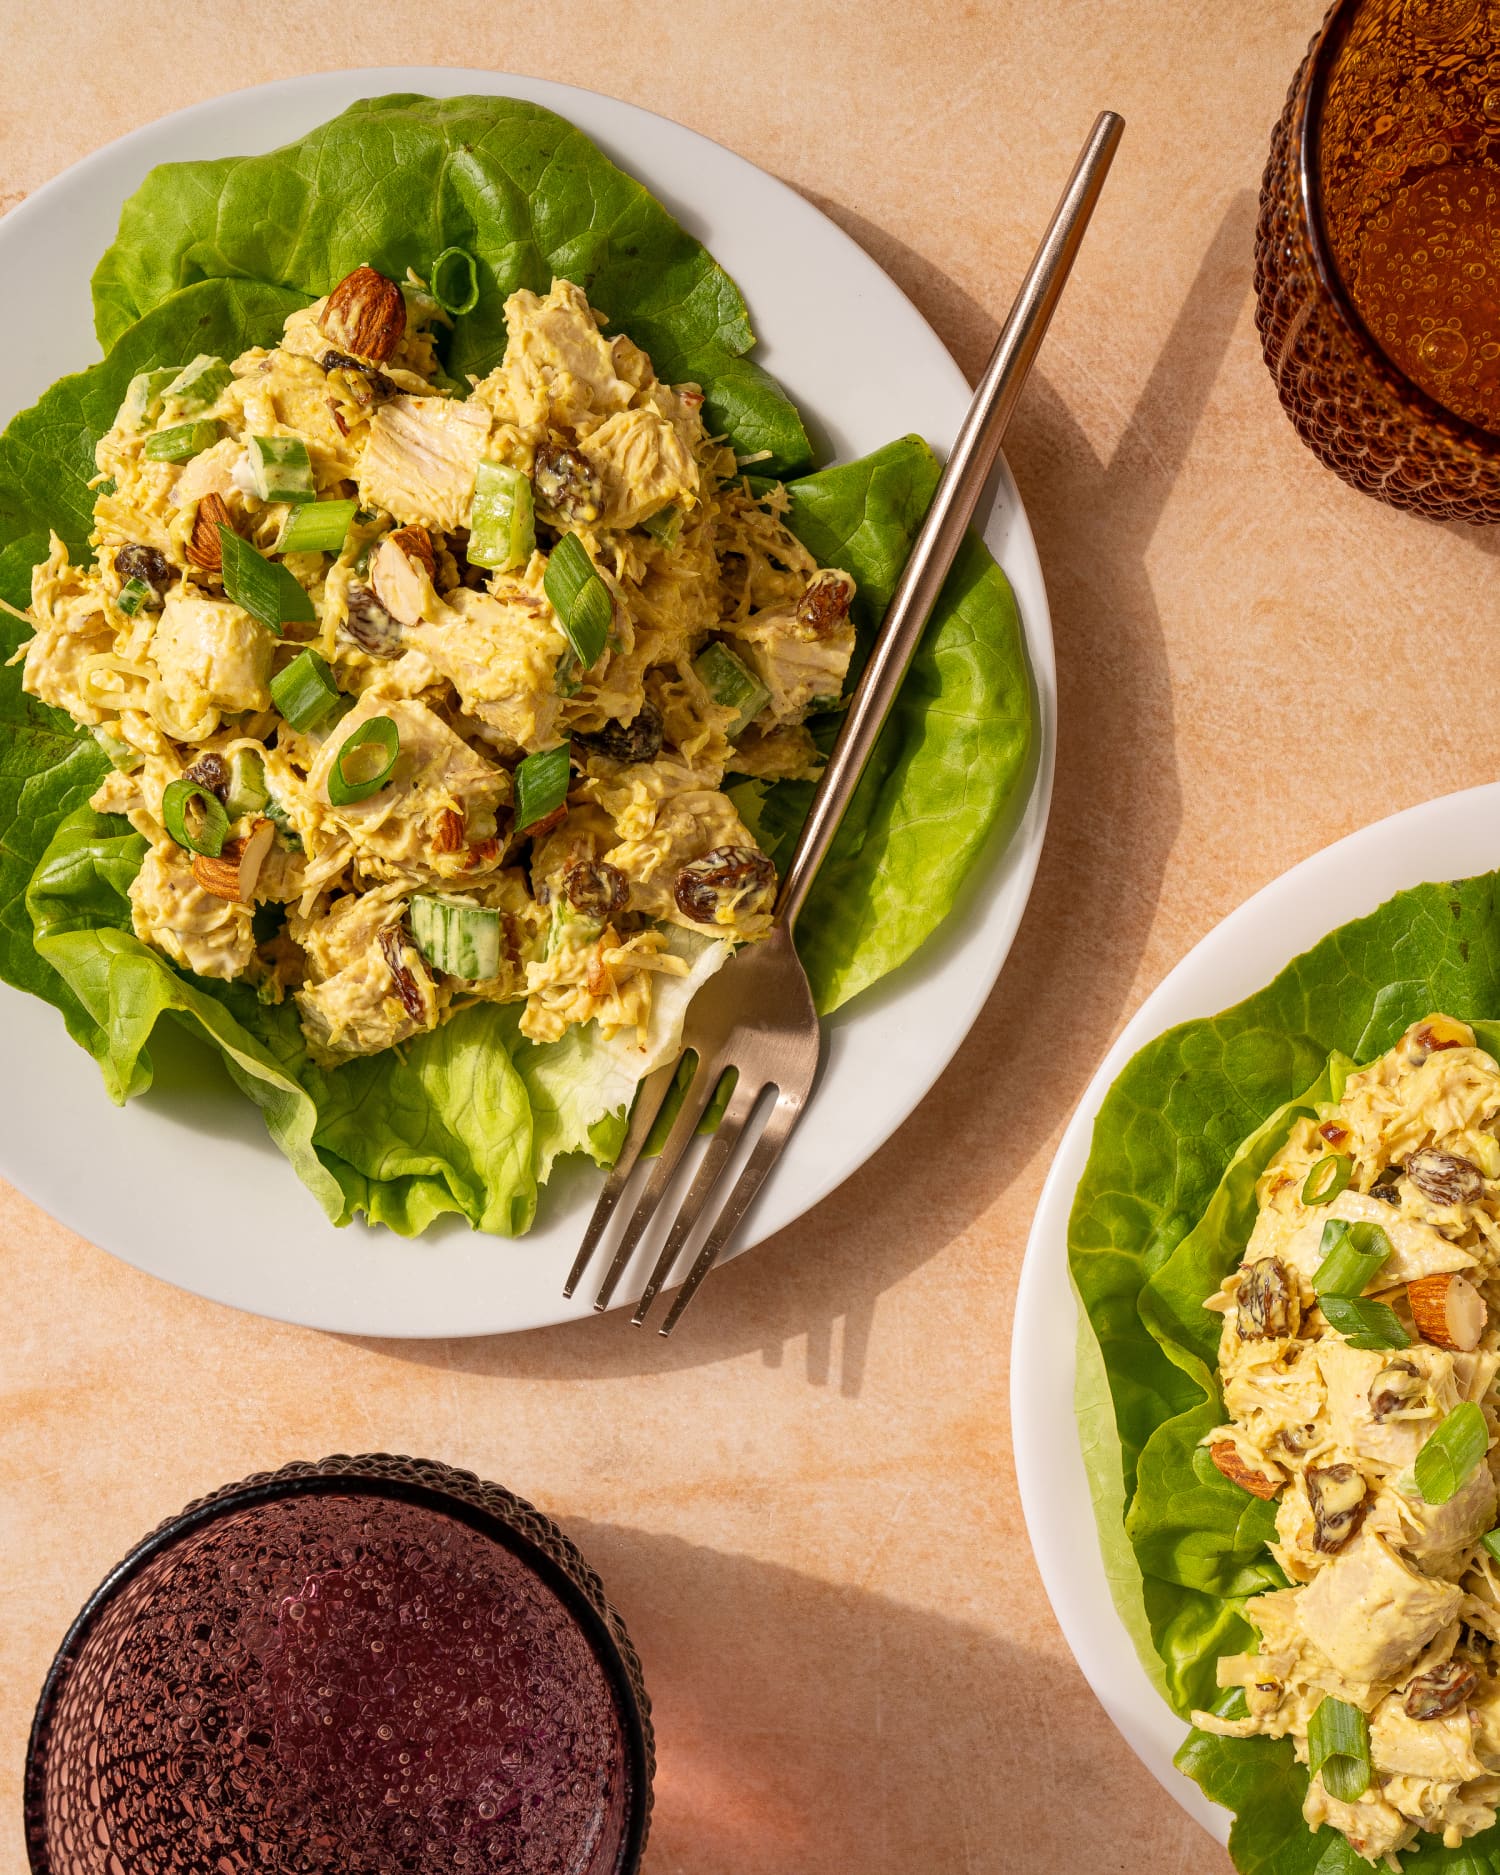 Curried Chicken Salad Has the Perfect Blend of Spice and Sweetness